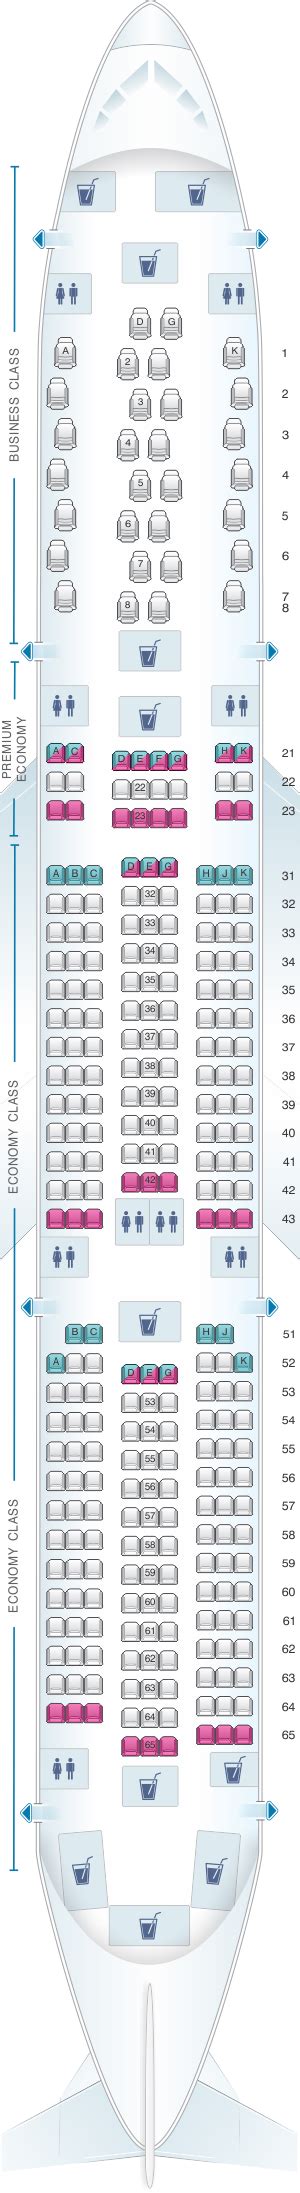 Share 179 Imagen Boeing 777 300er Seat Map Philippine Airlines In